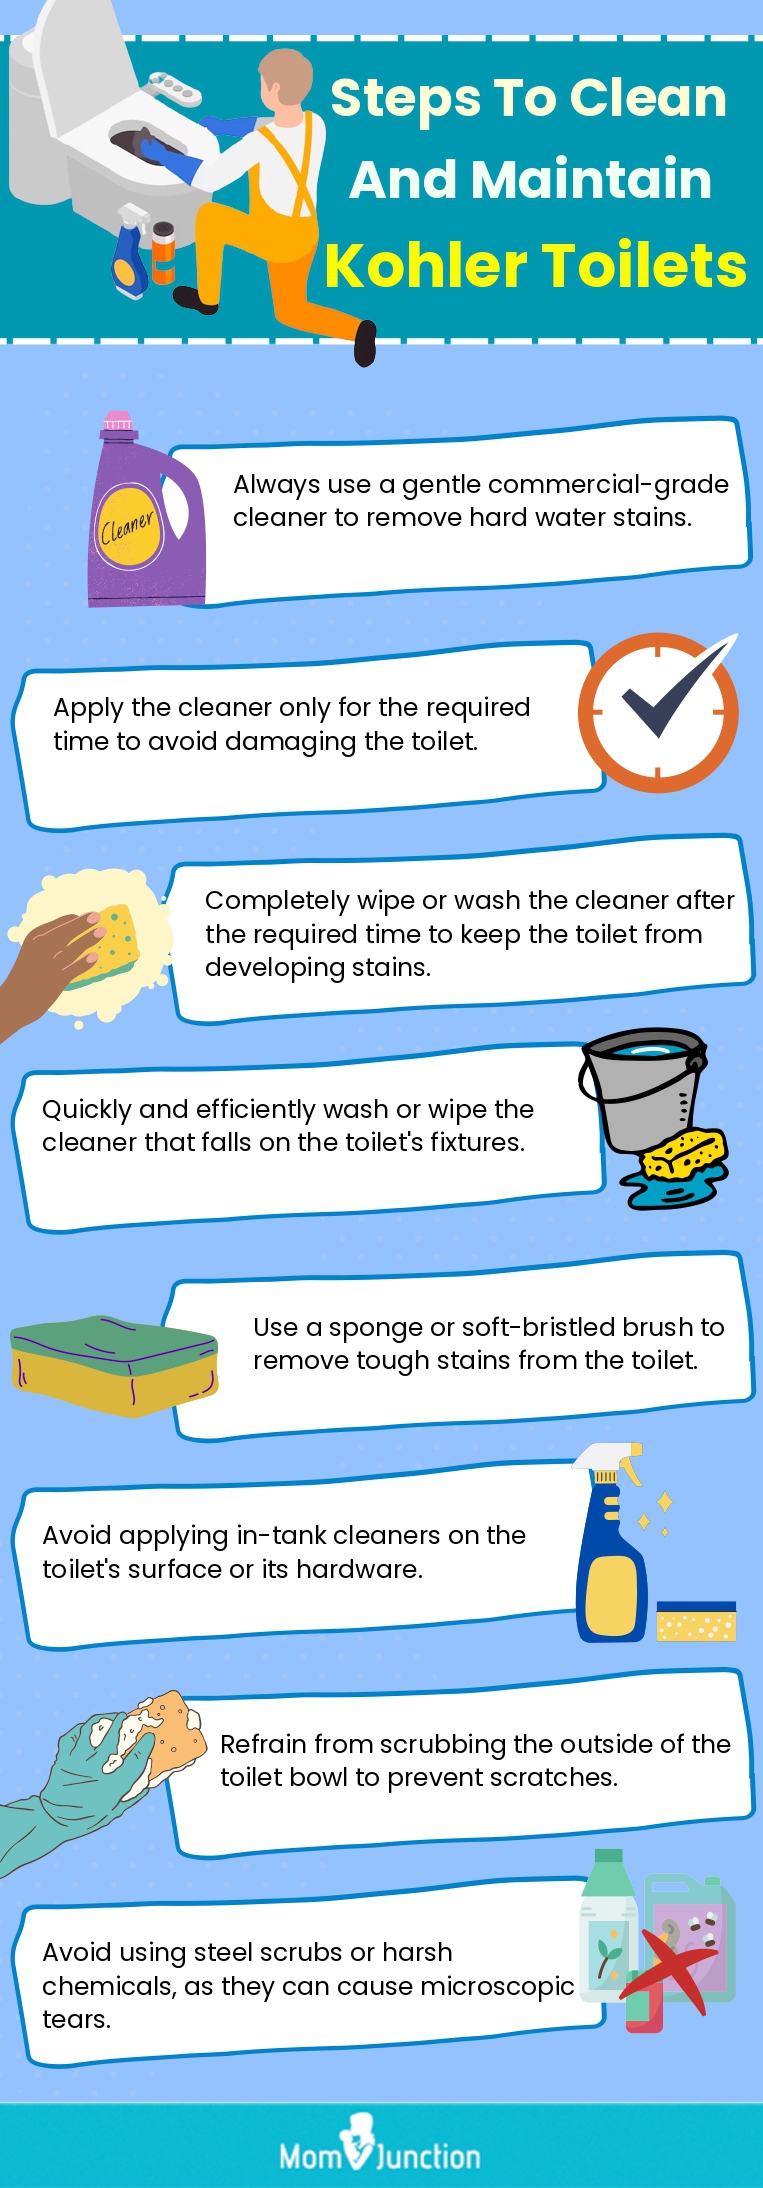 Steps To Clean And Maintain Kohler Toilets(infographic)